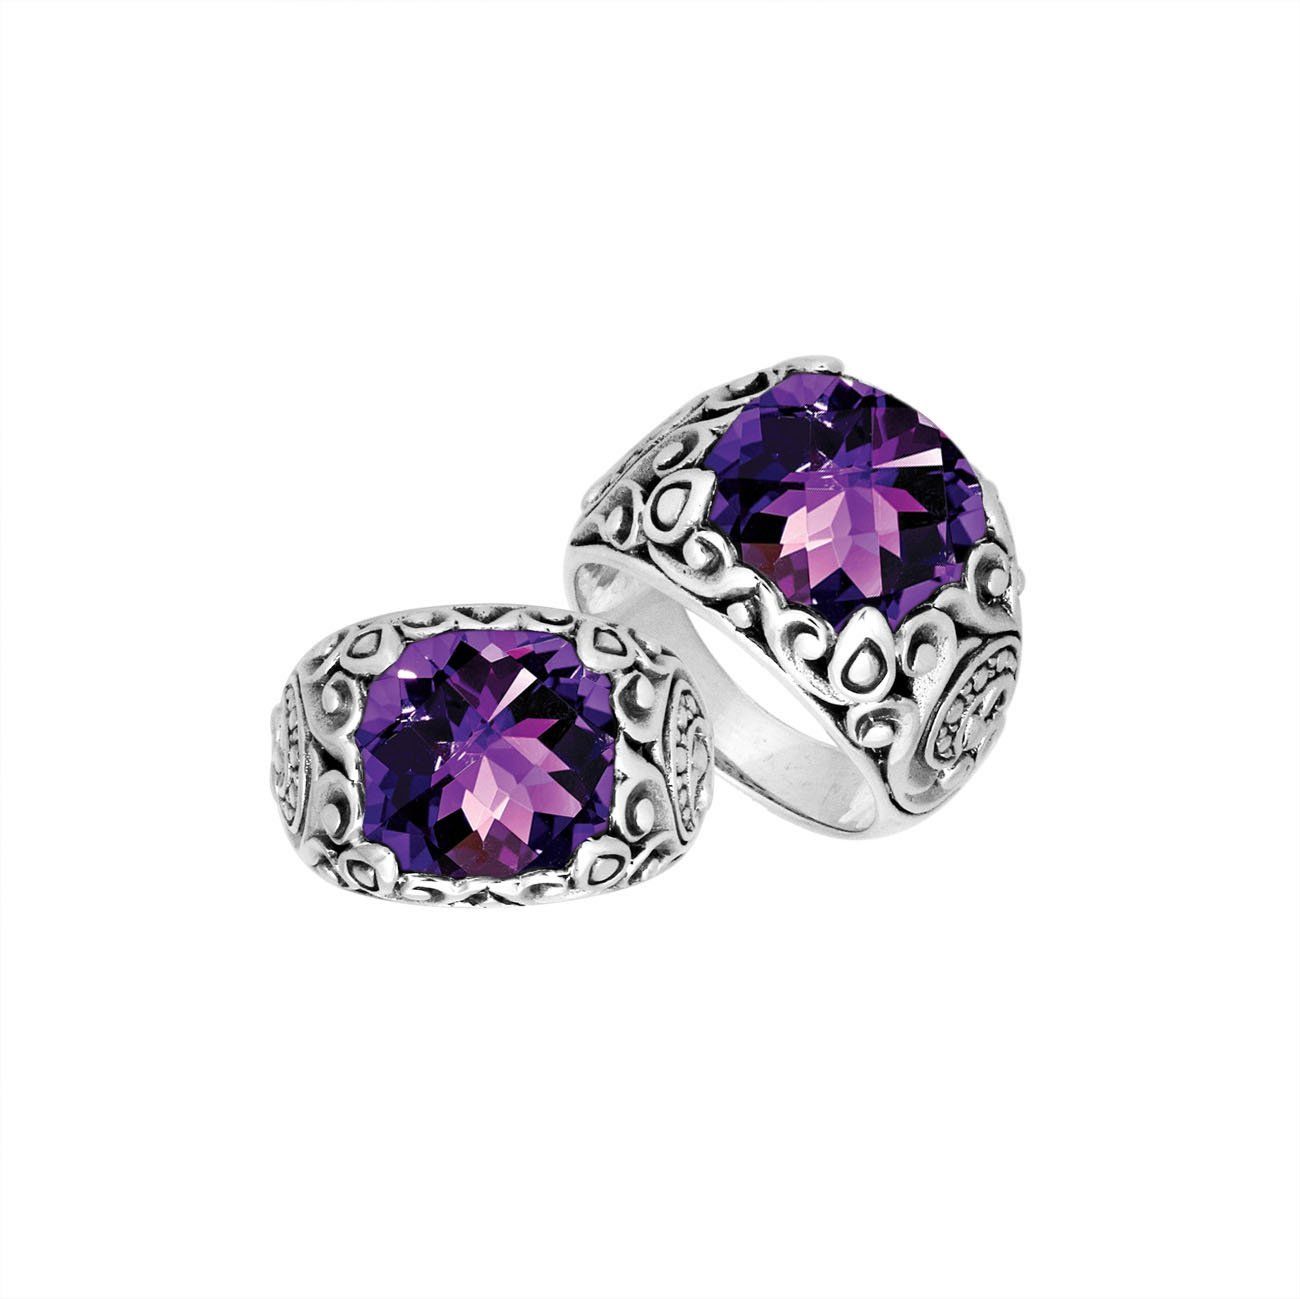 AR-8031-AM-8 Sterling Silver Ring With Amethyst Q.